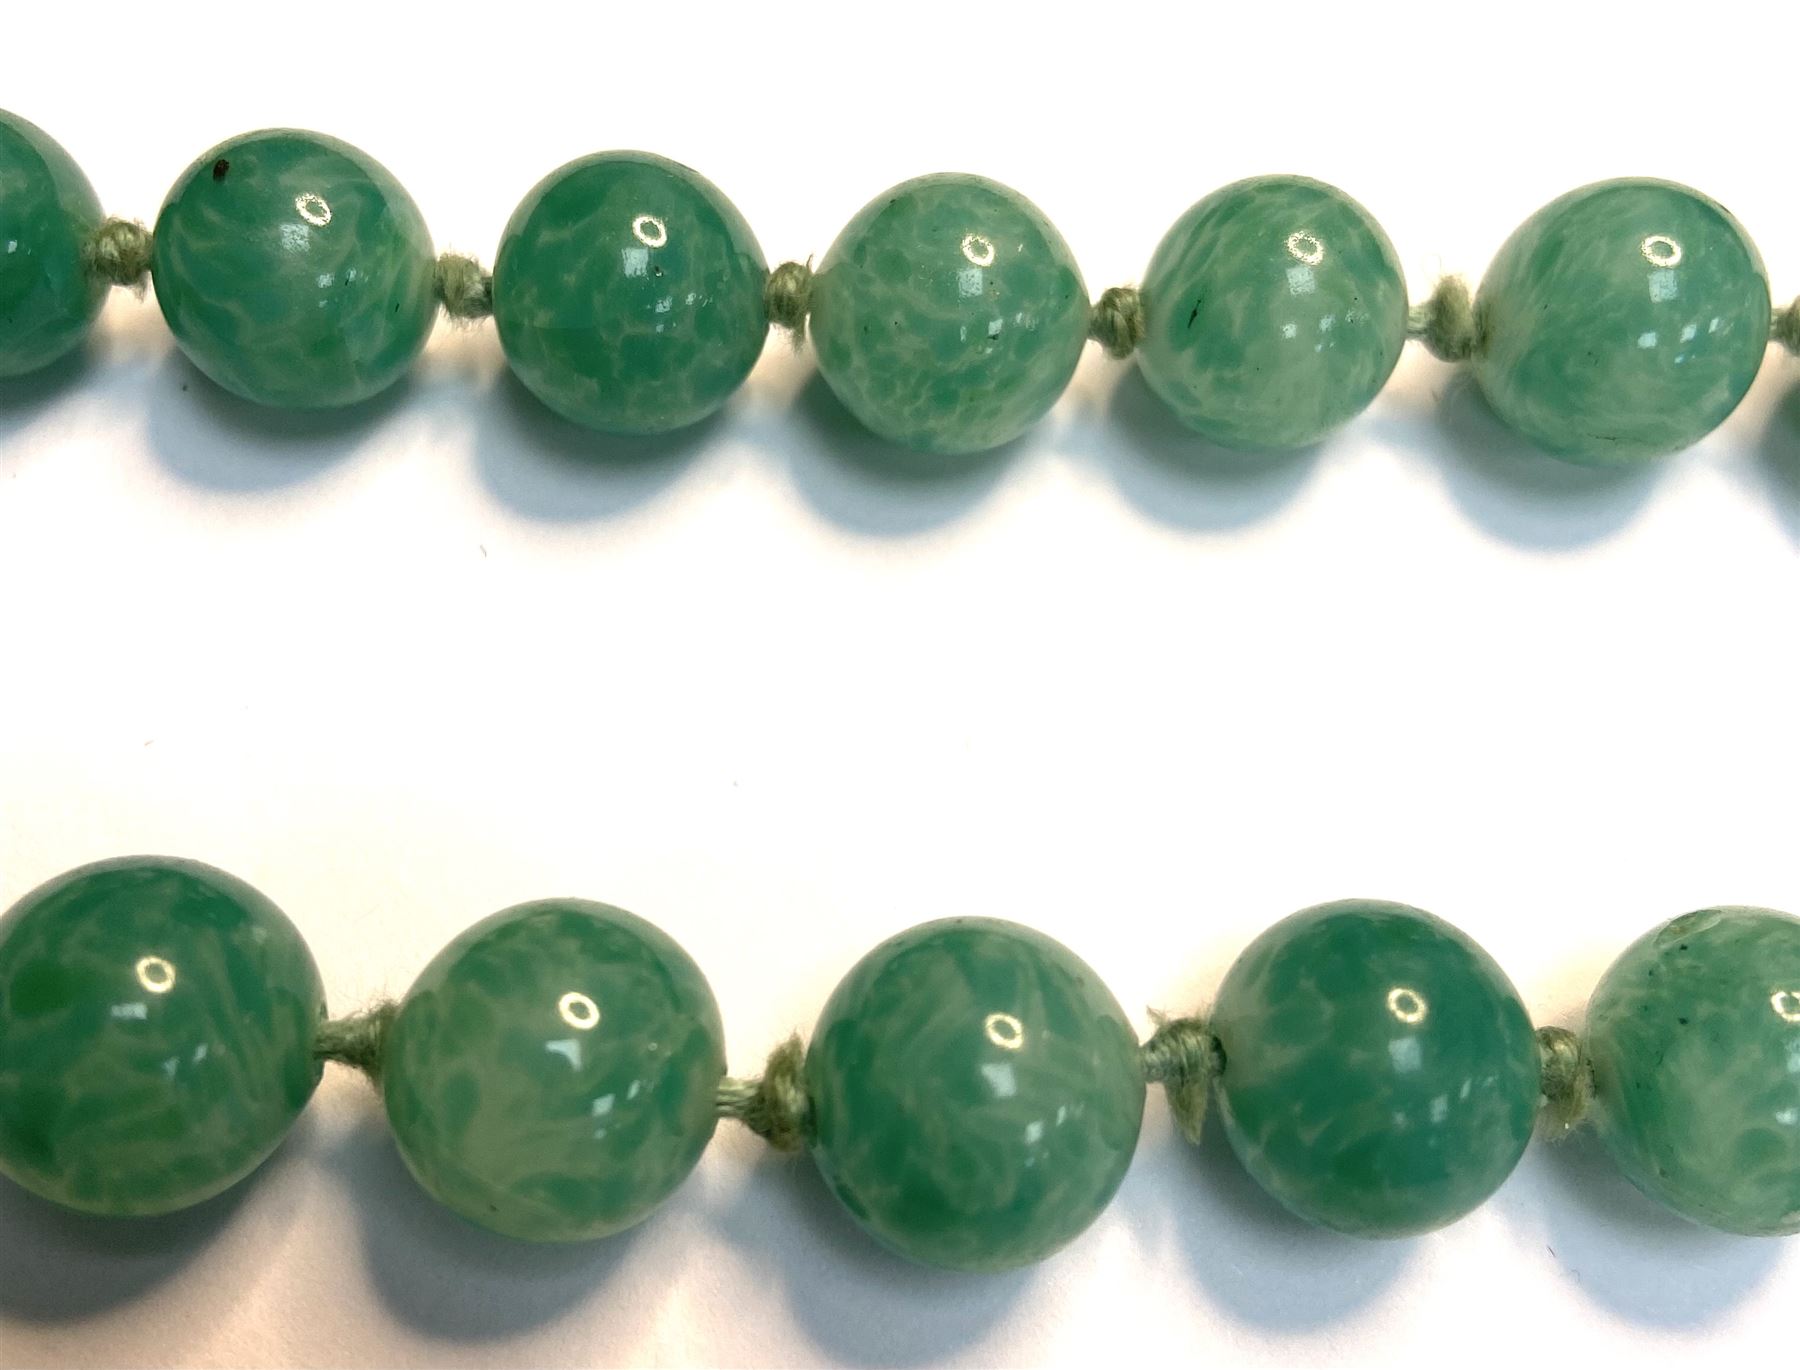 Chinese jade bead necklace with silver open work clasp with a cabochon greenstone/possibly jade bead - Image 7 of 7